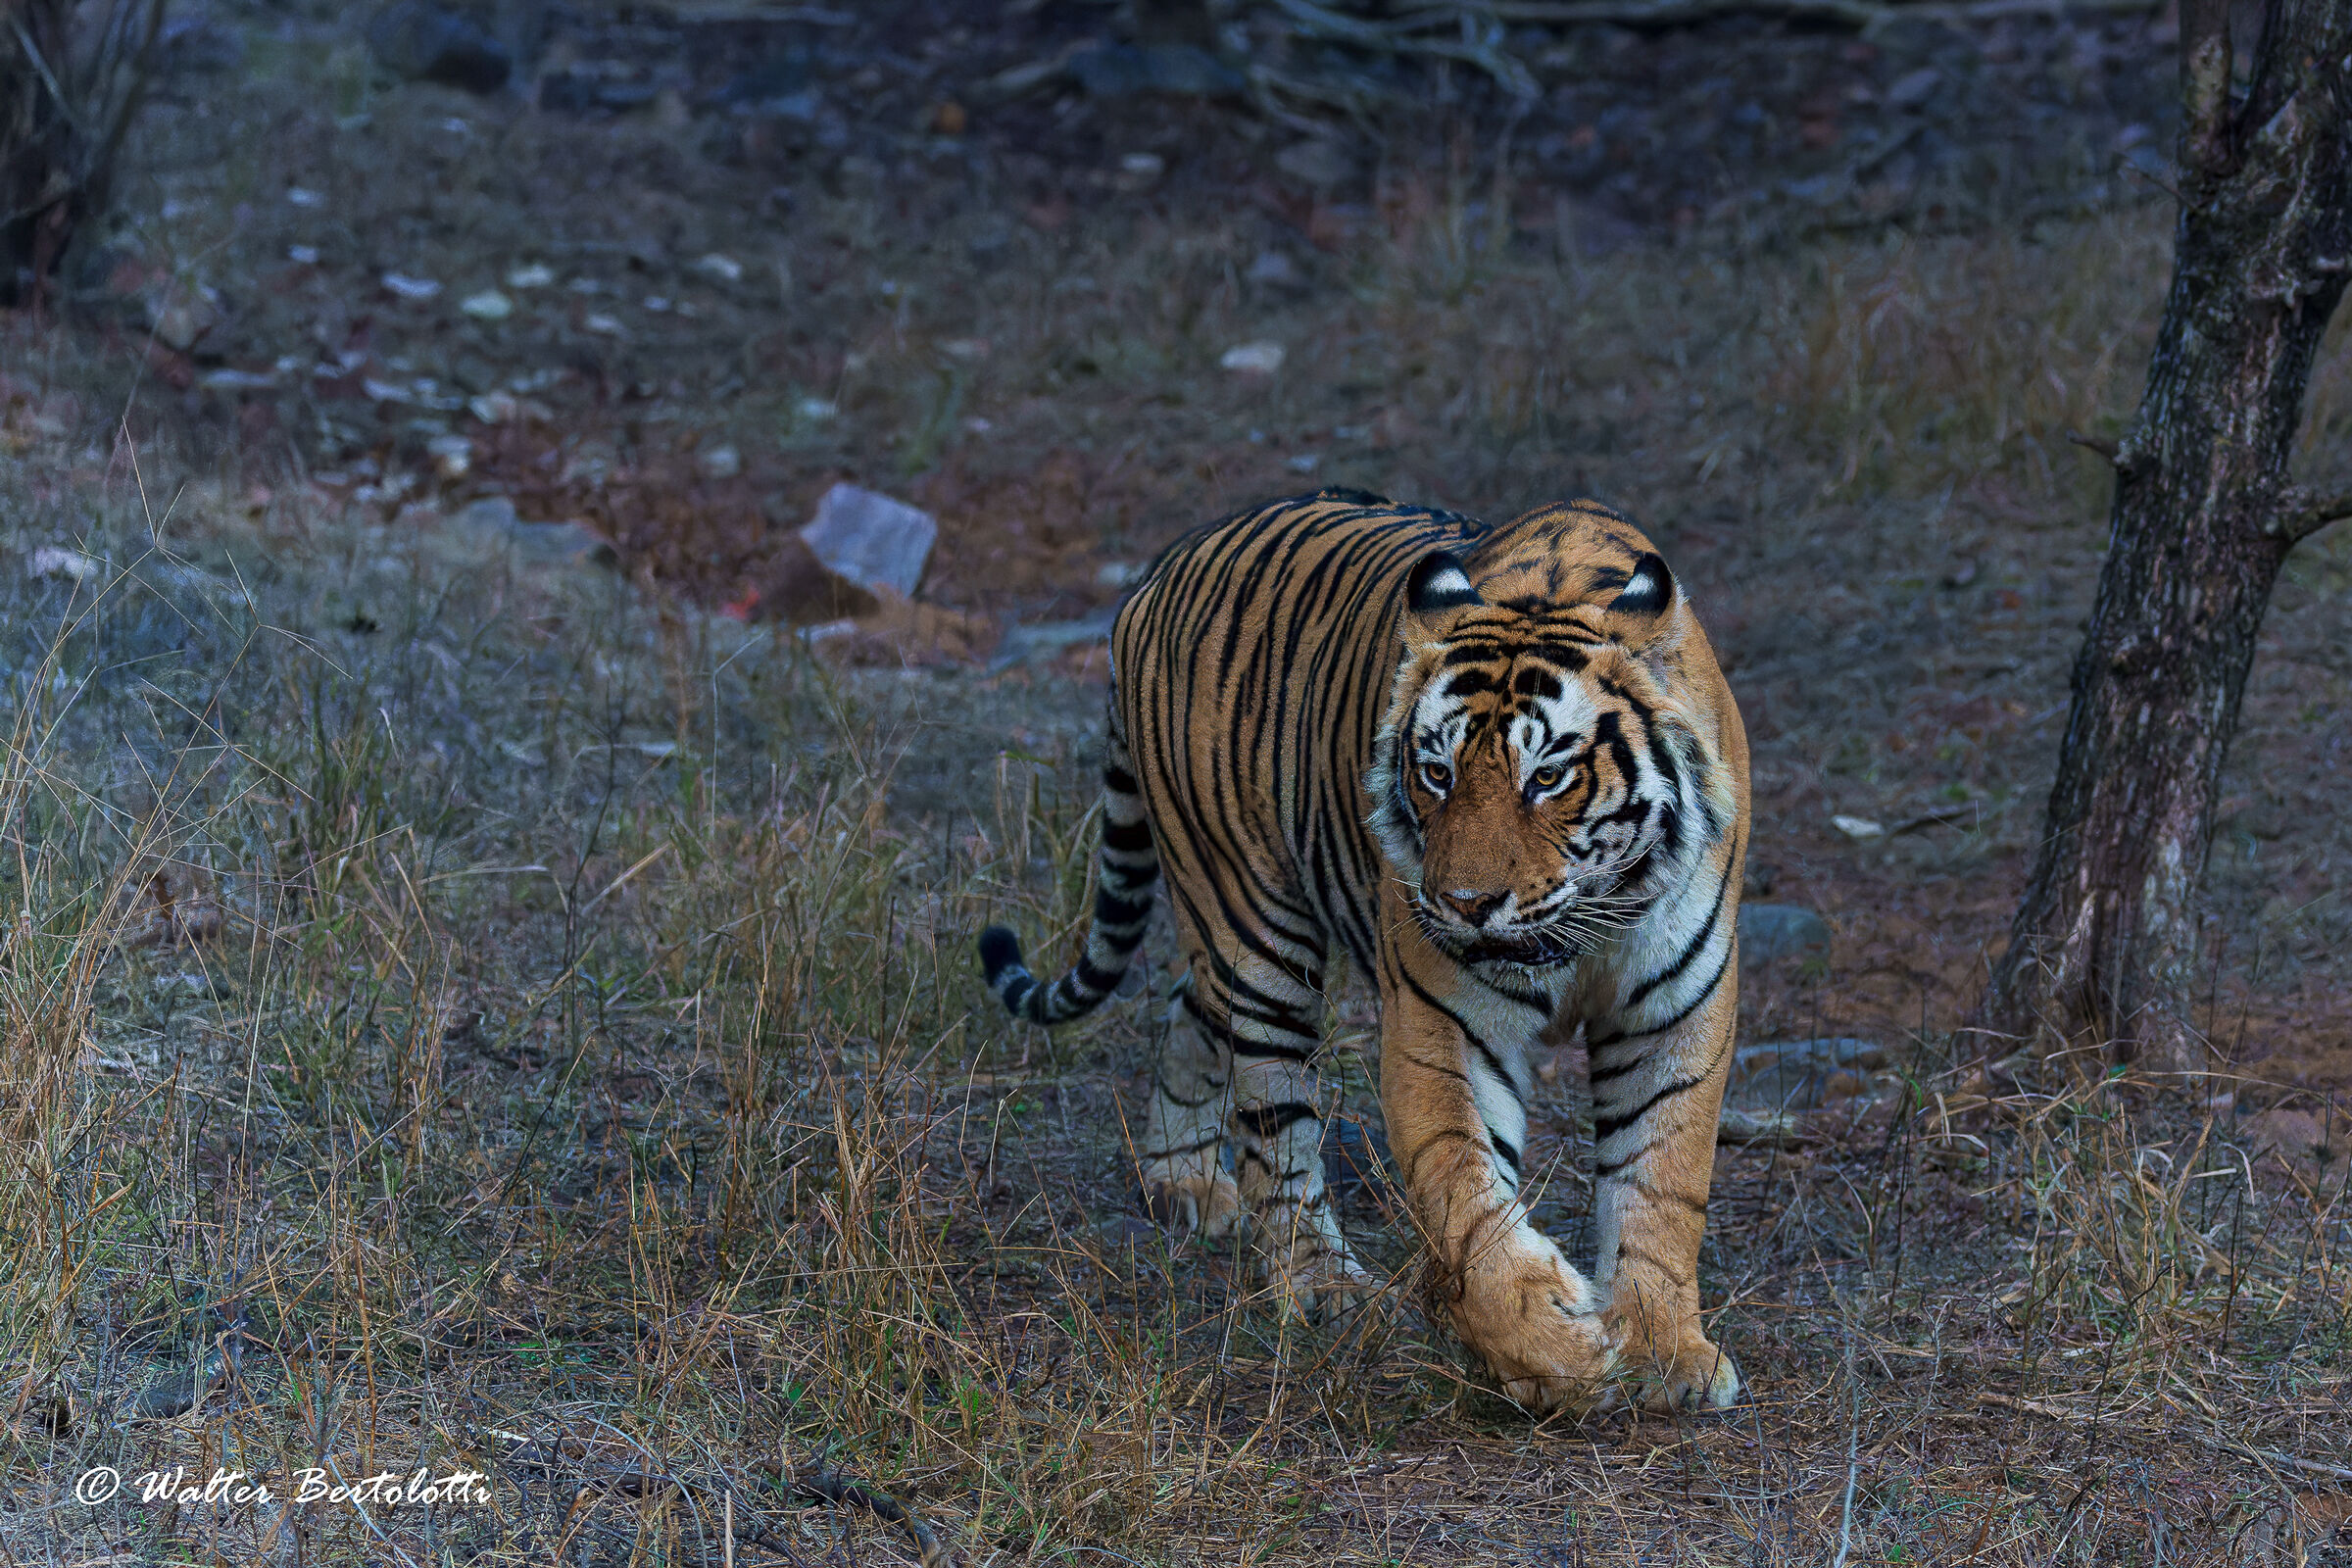 The King of Ranthambore...